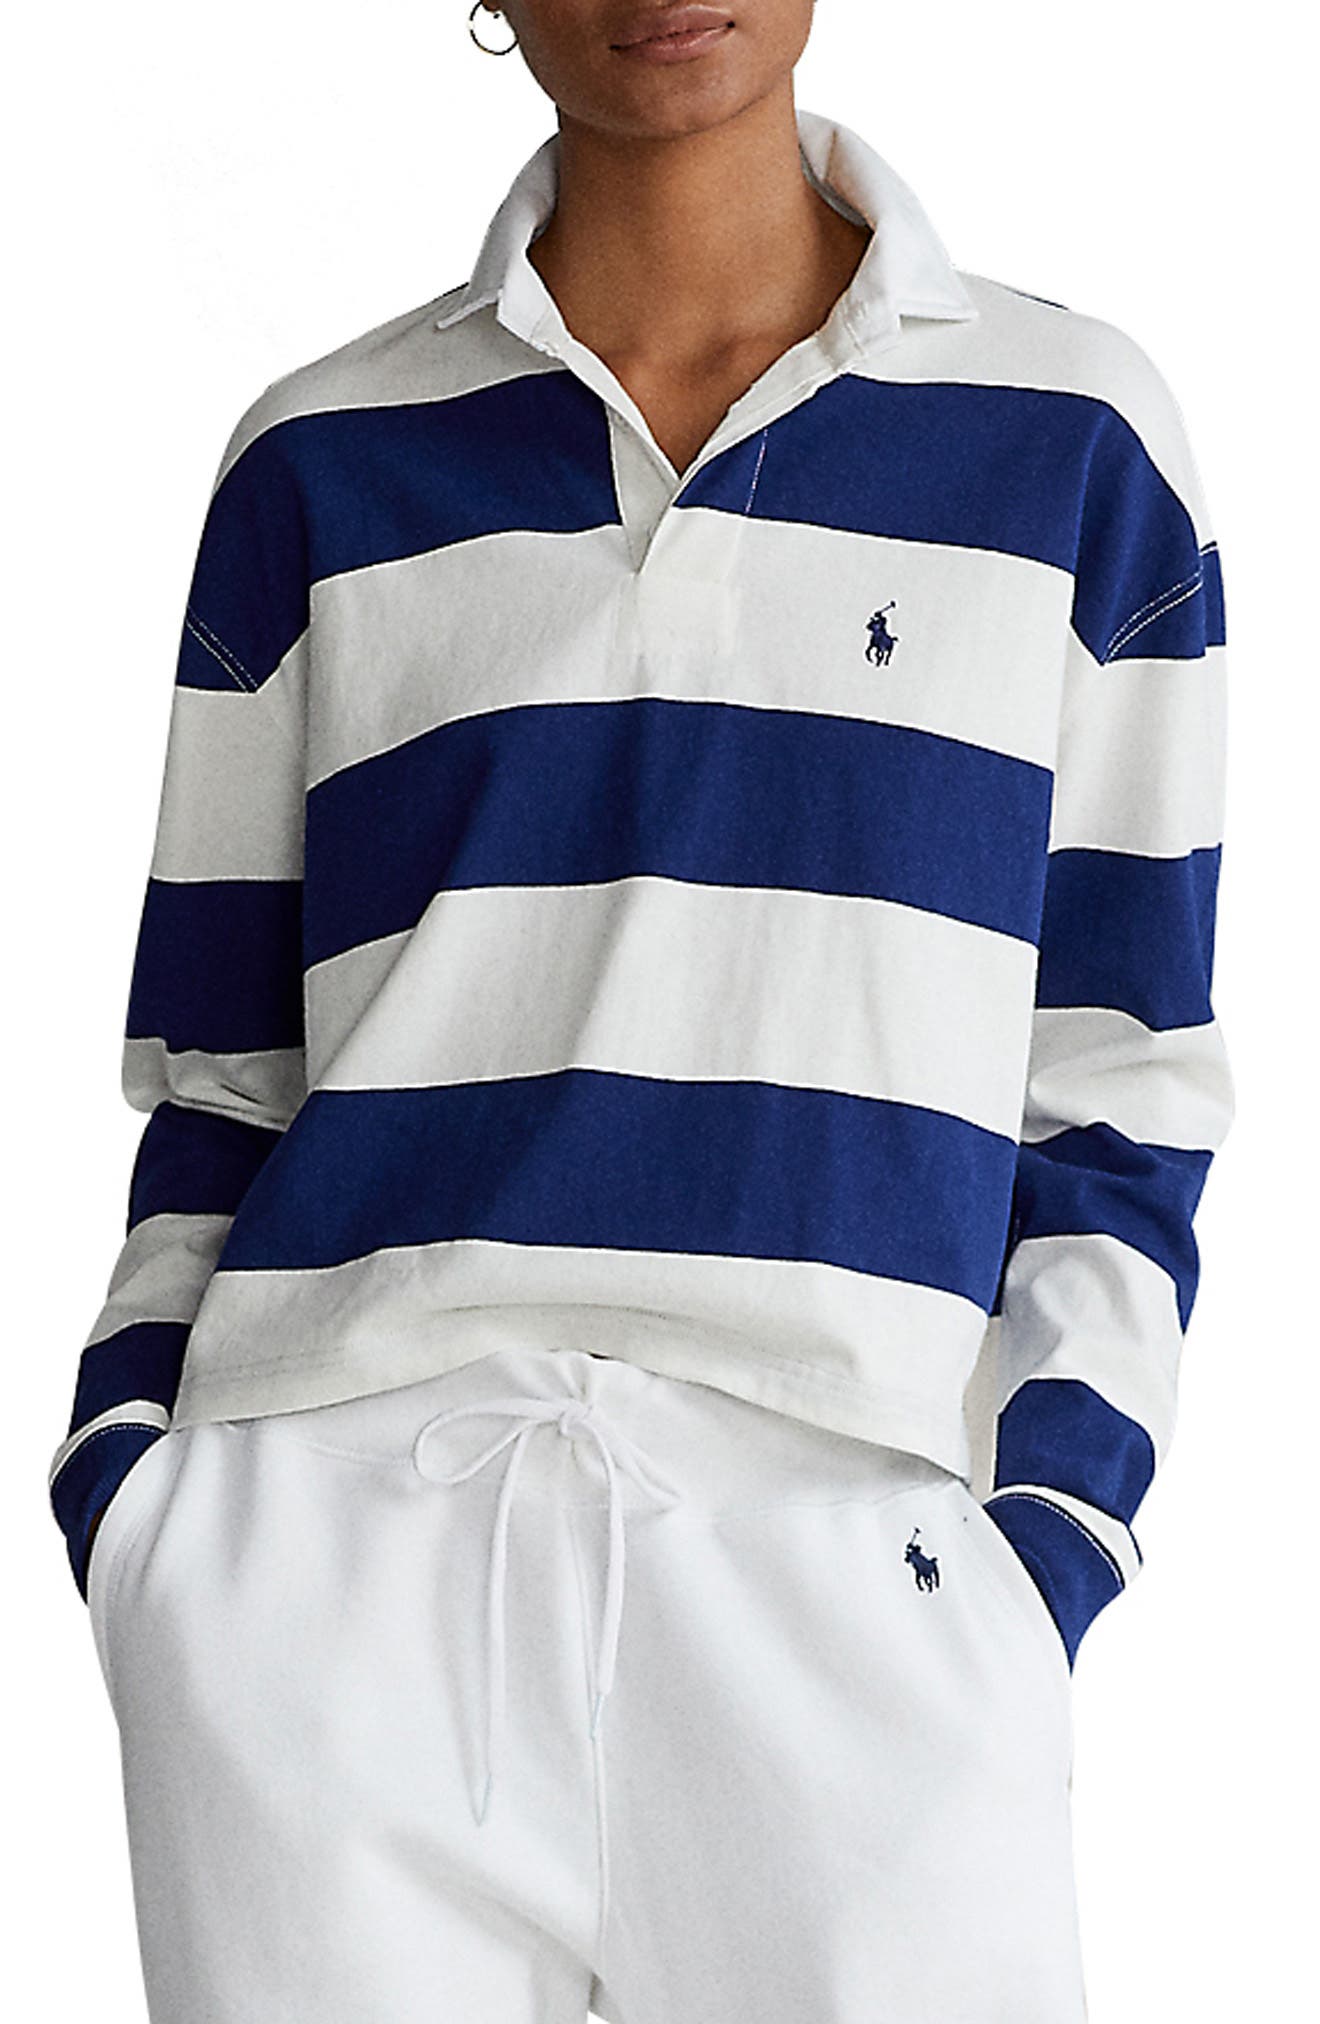 Polo/ Rugby style Shirt 100% cotton